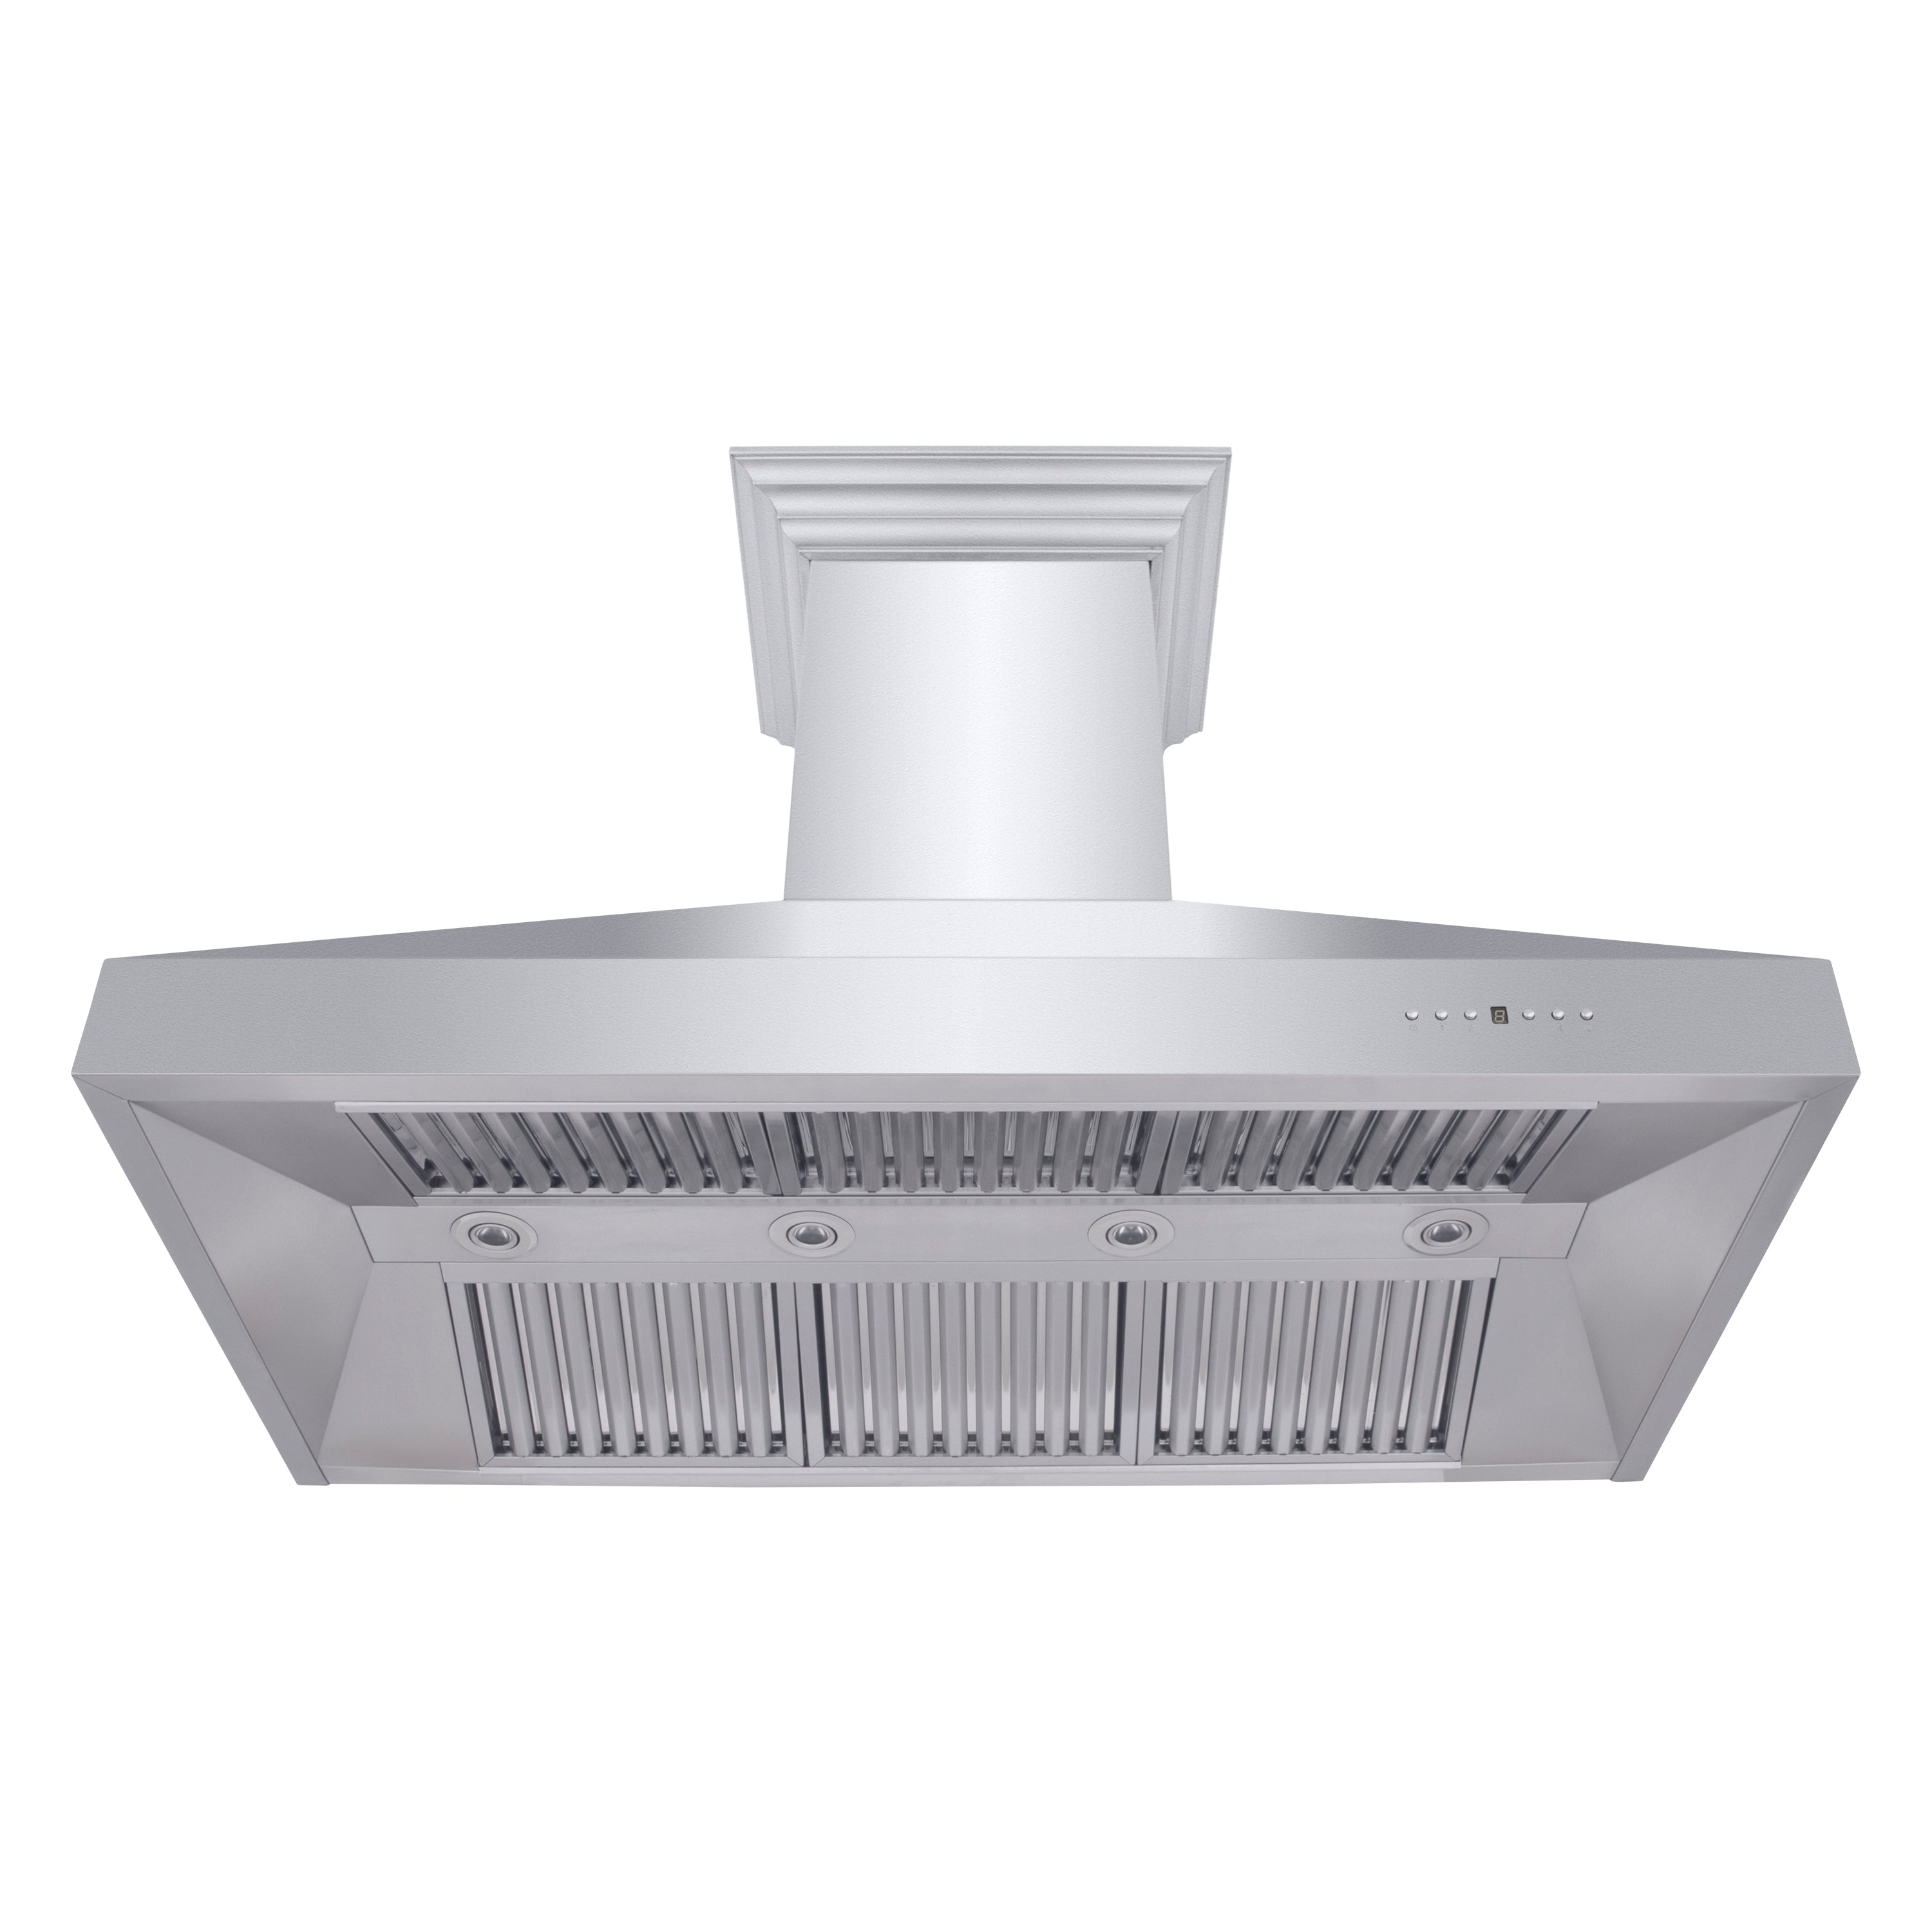 ZLINE 48" Professional Ducted Wall Mount Range Hood in Stainless Steel with Crown Molding (667CRN-48)